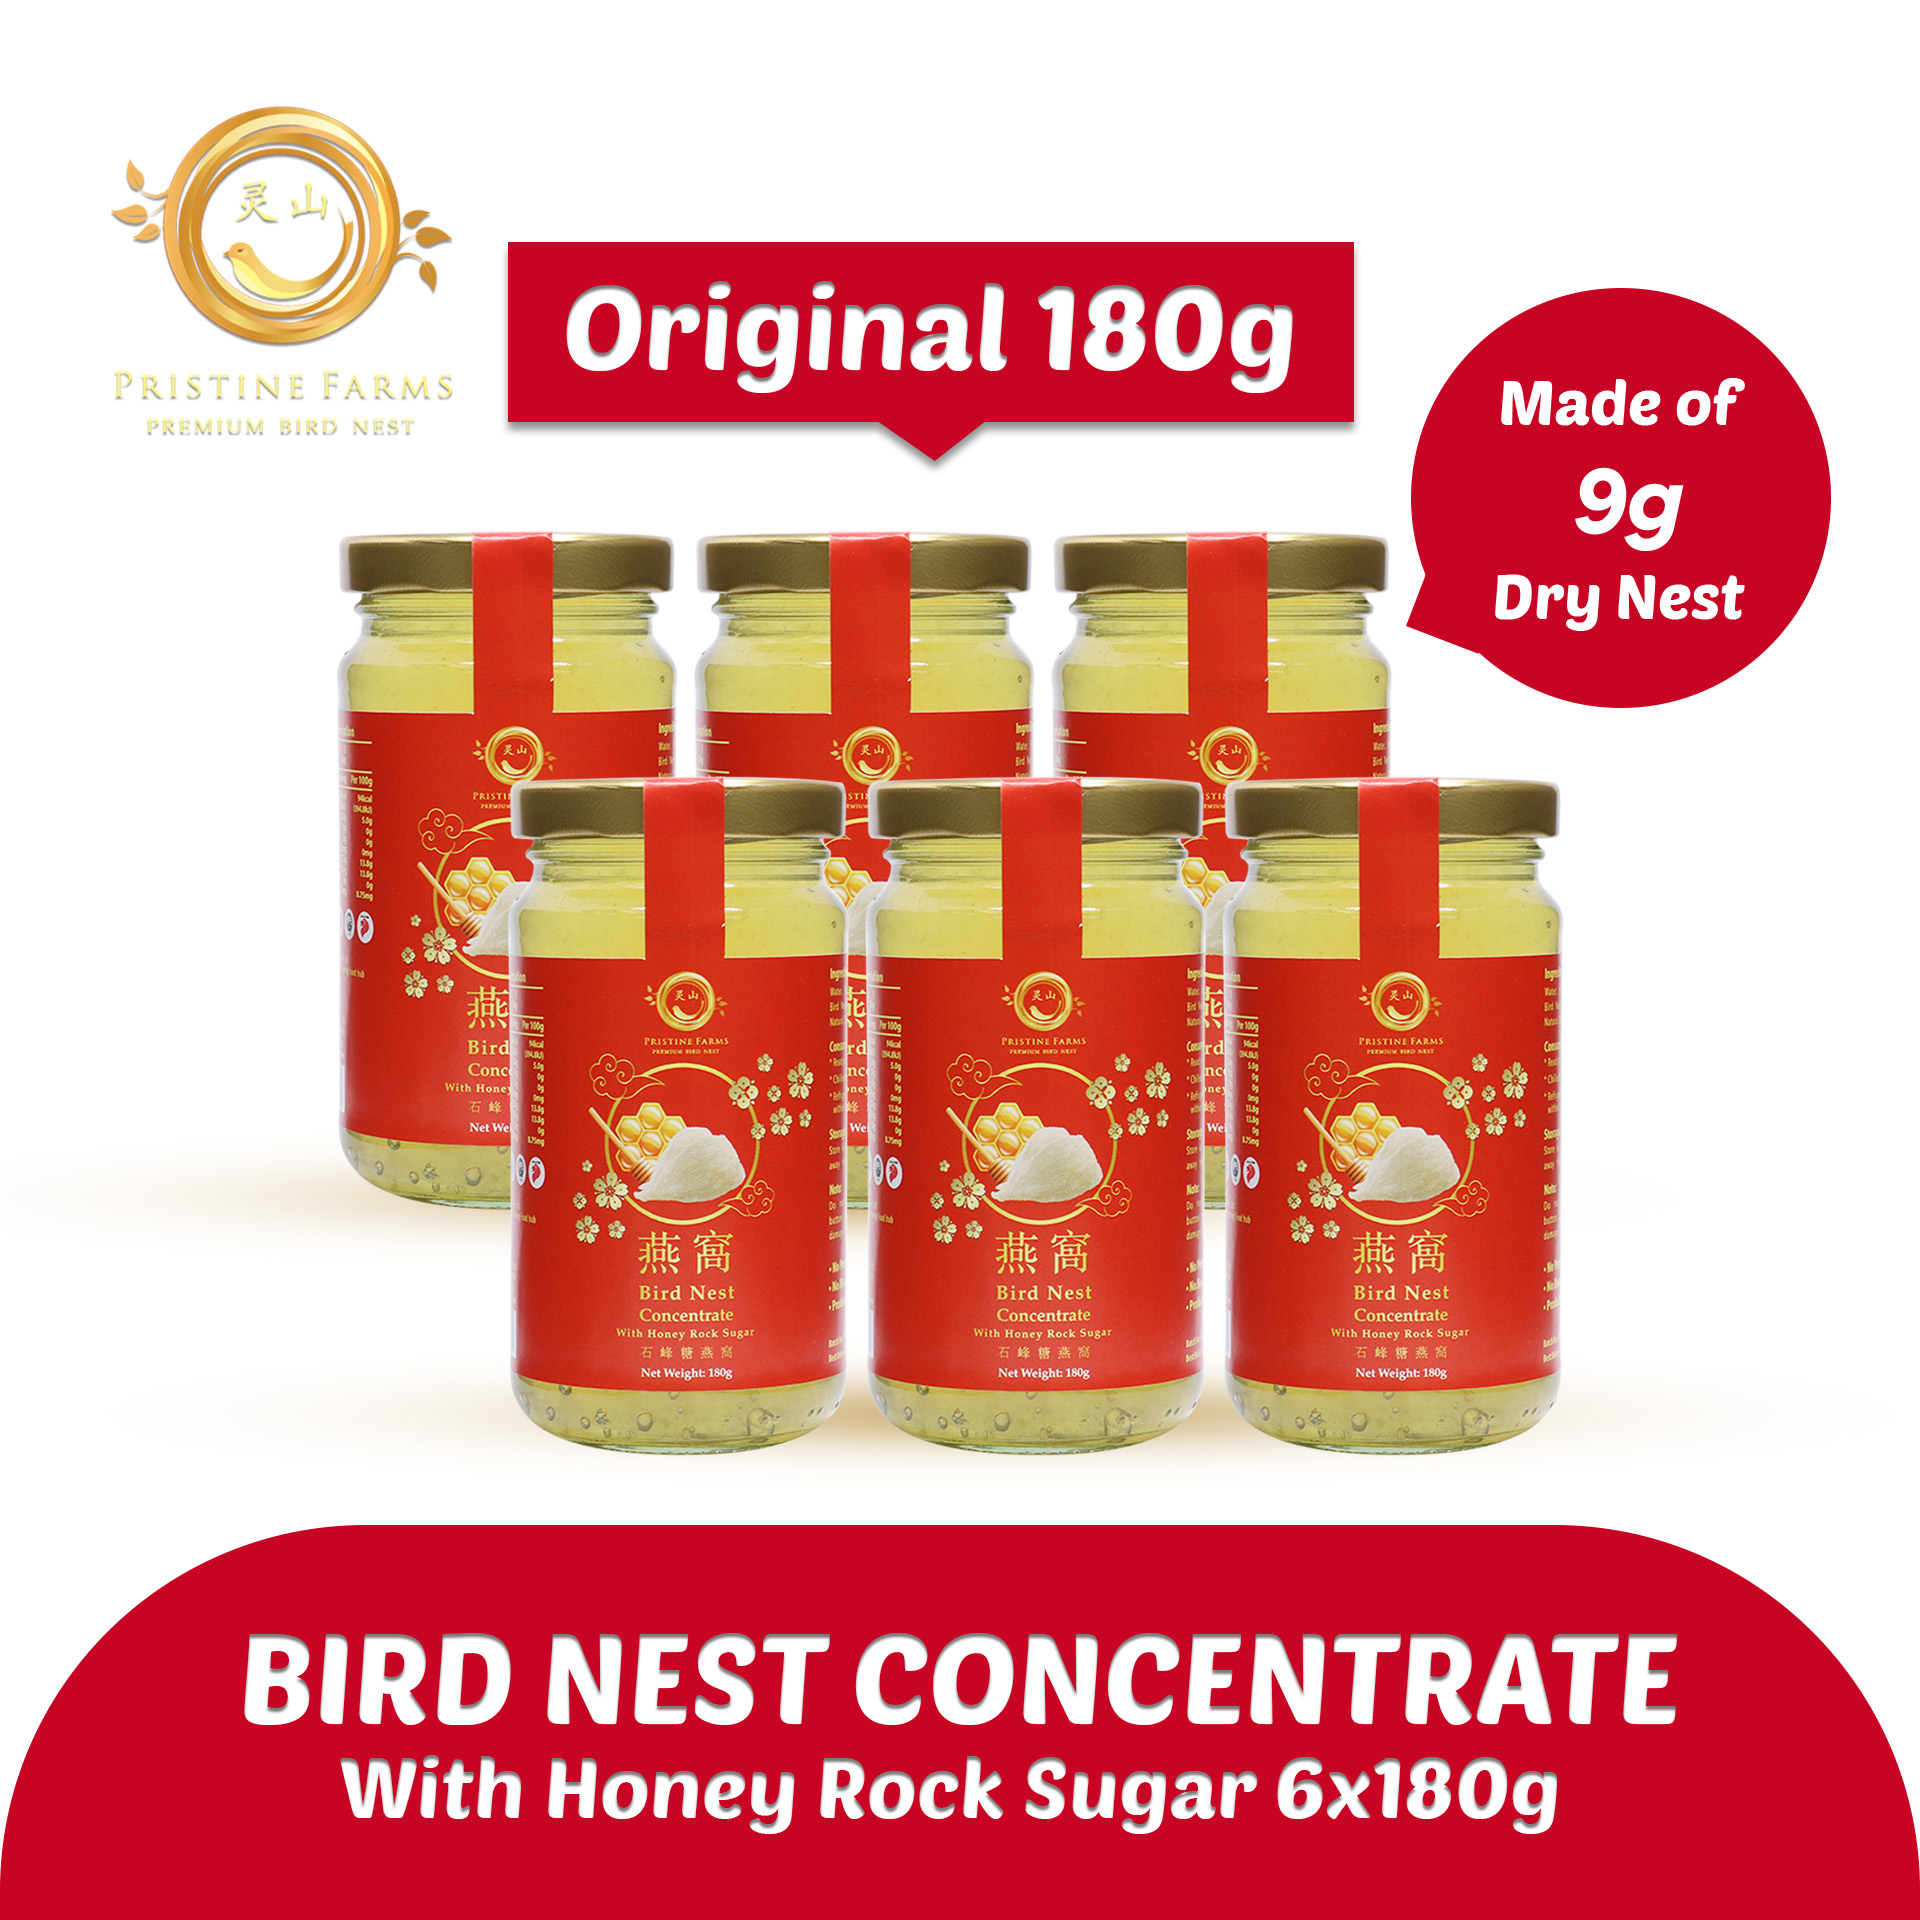 Pristine Farm Bird Nest Concentrate with Generous 9g of Dry Nest - Bundle of 6 x 180g Big Bottle